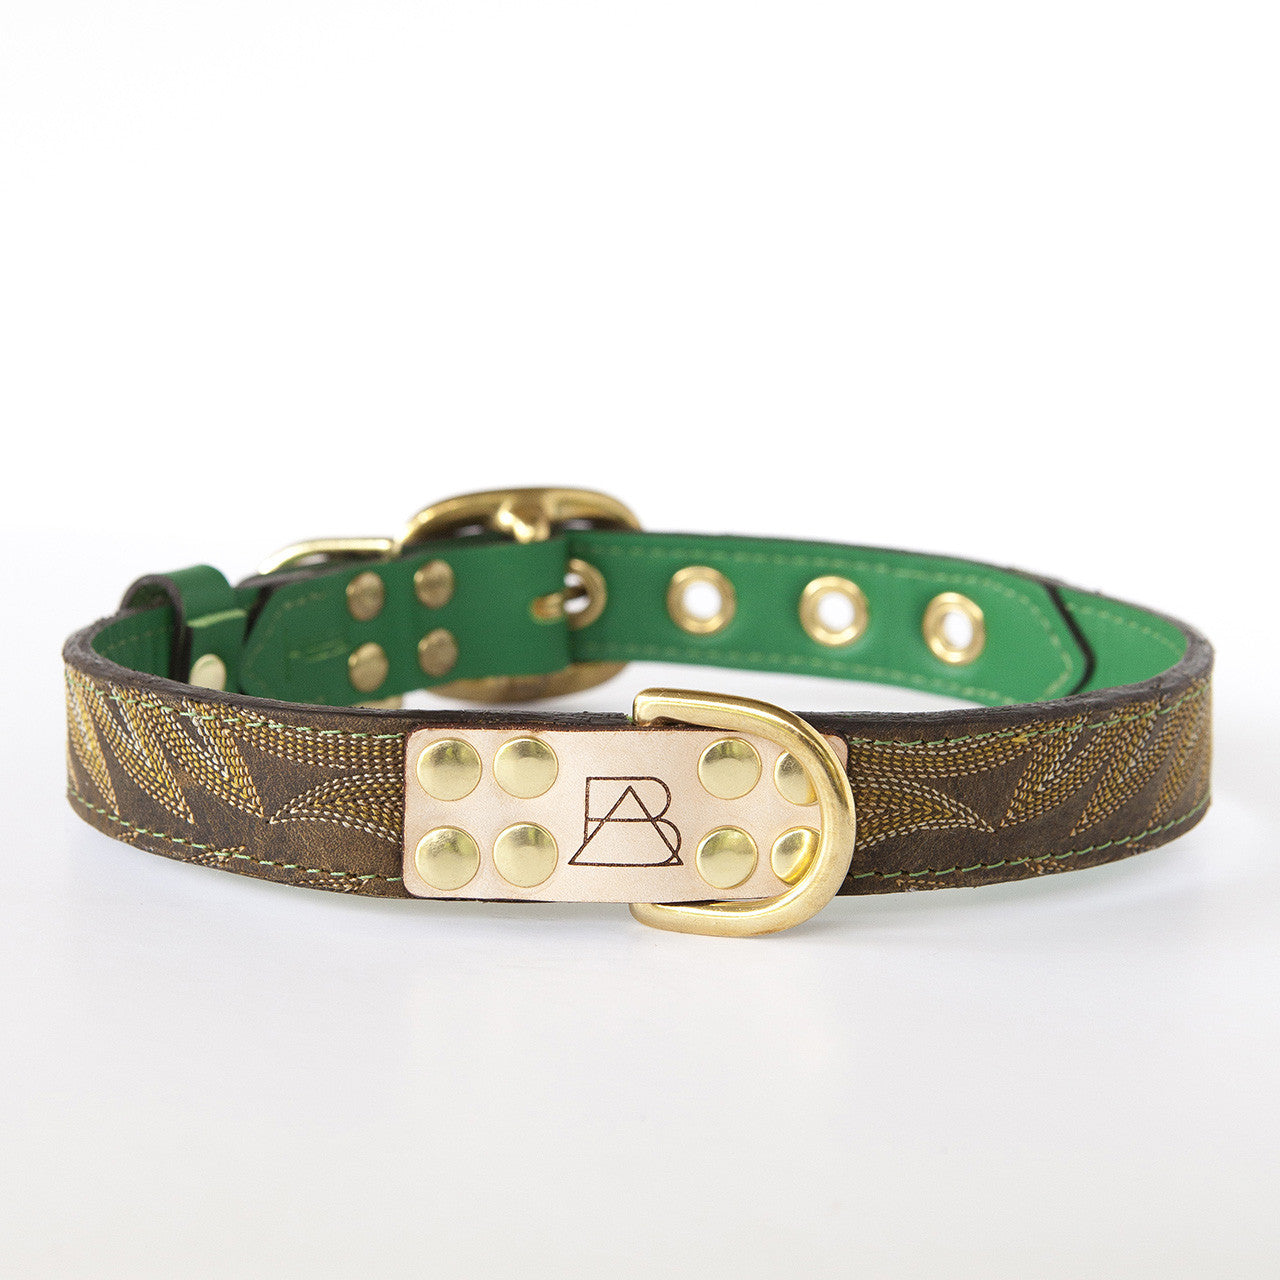 Emerald Green Dog Collar with Dark Brown Leather + Yellow and Tan Stitching